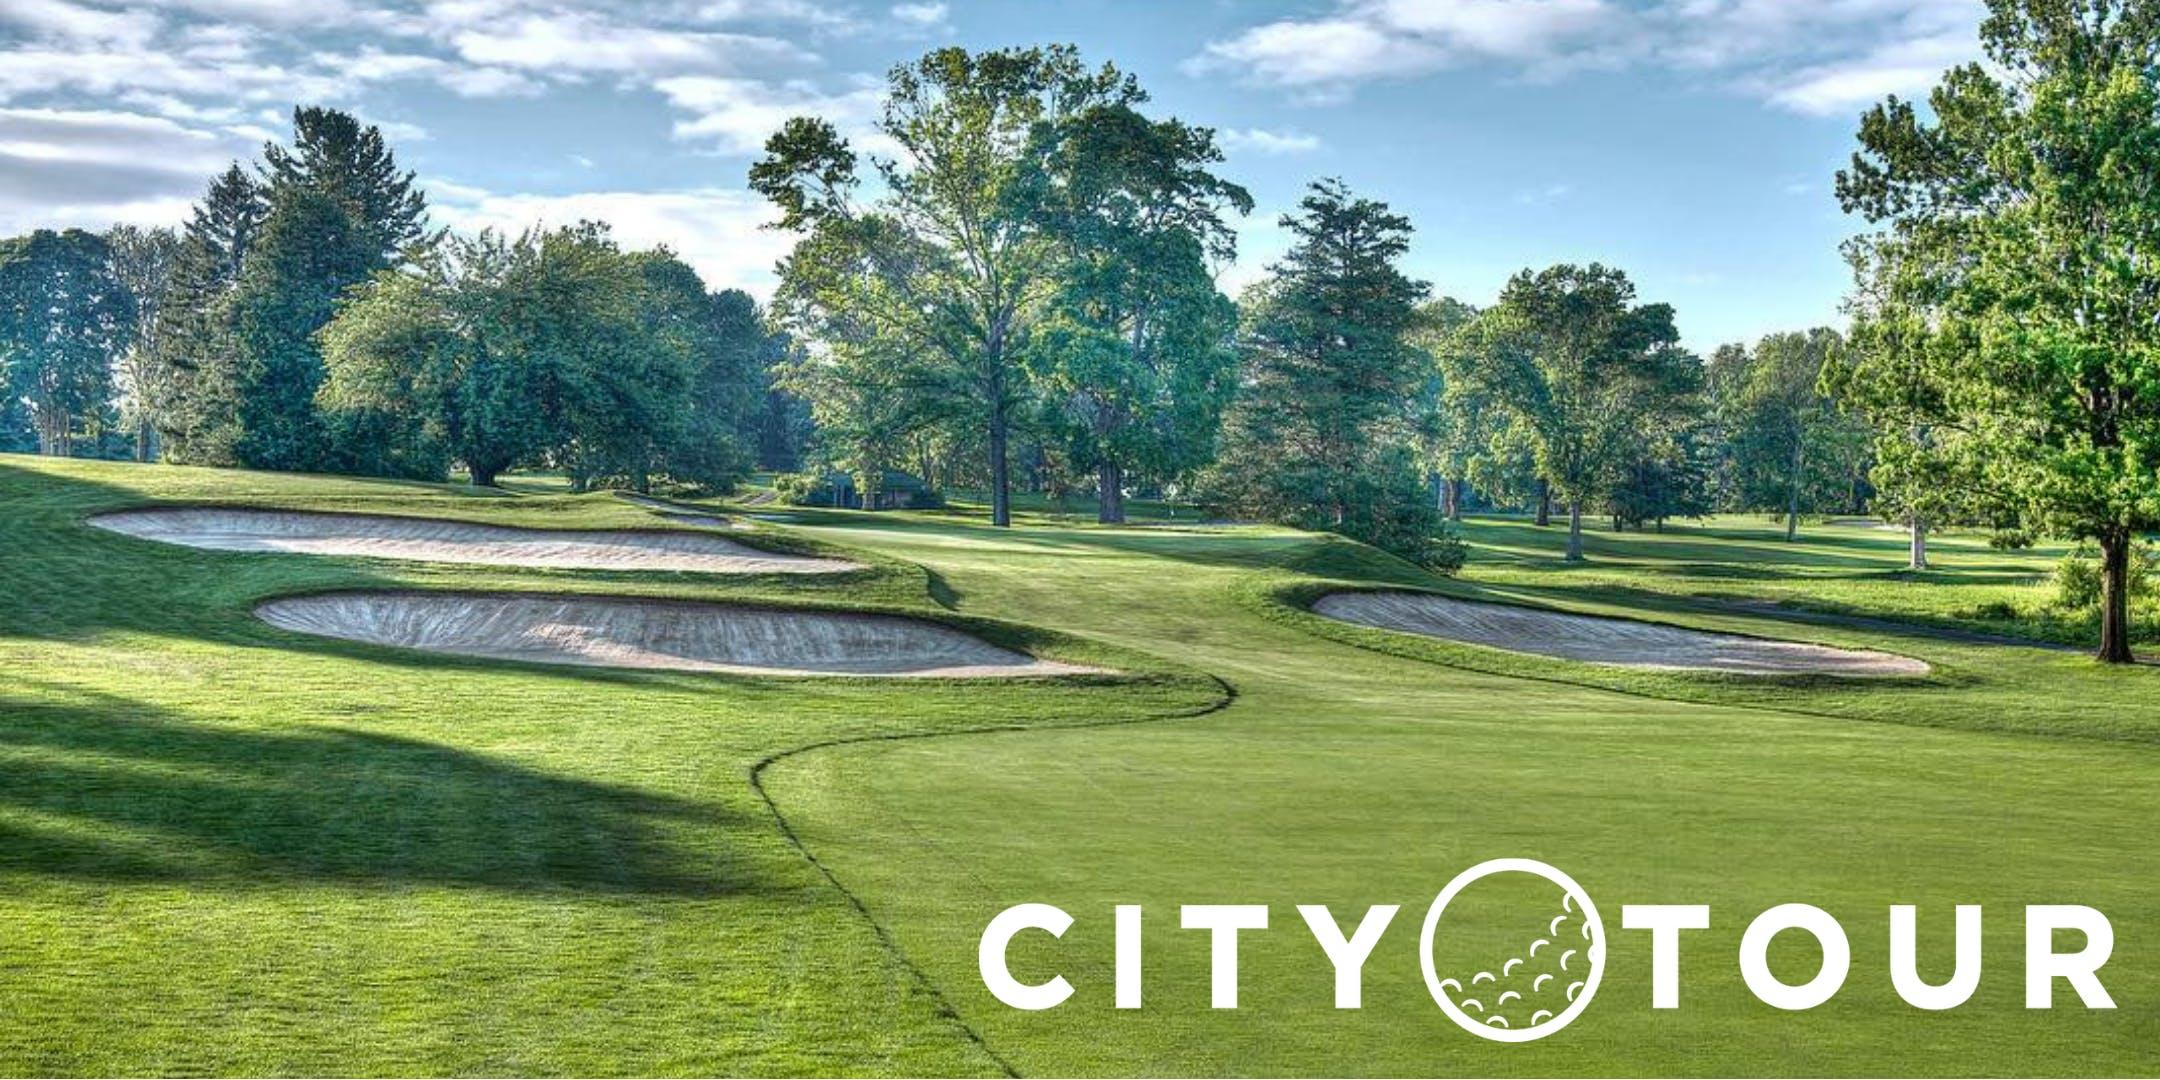 DC City Tour - Country Club of Woodmore